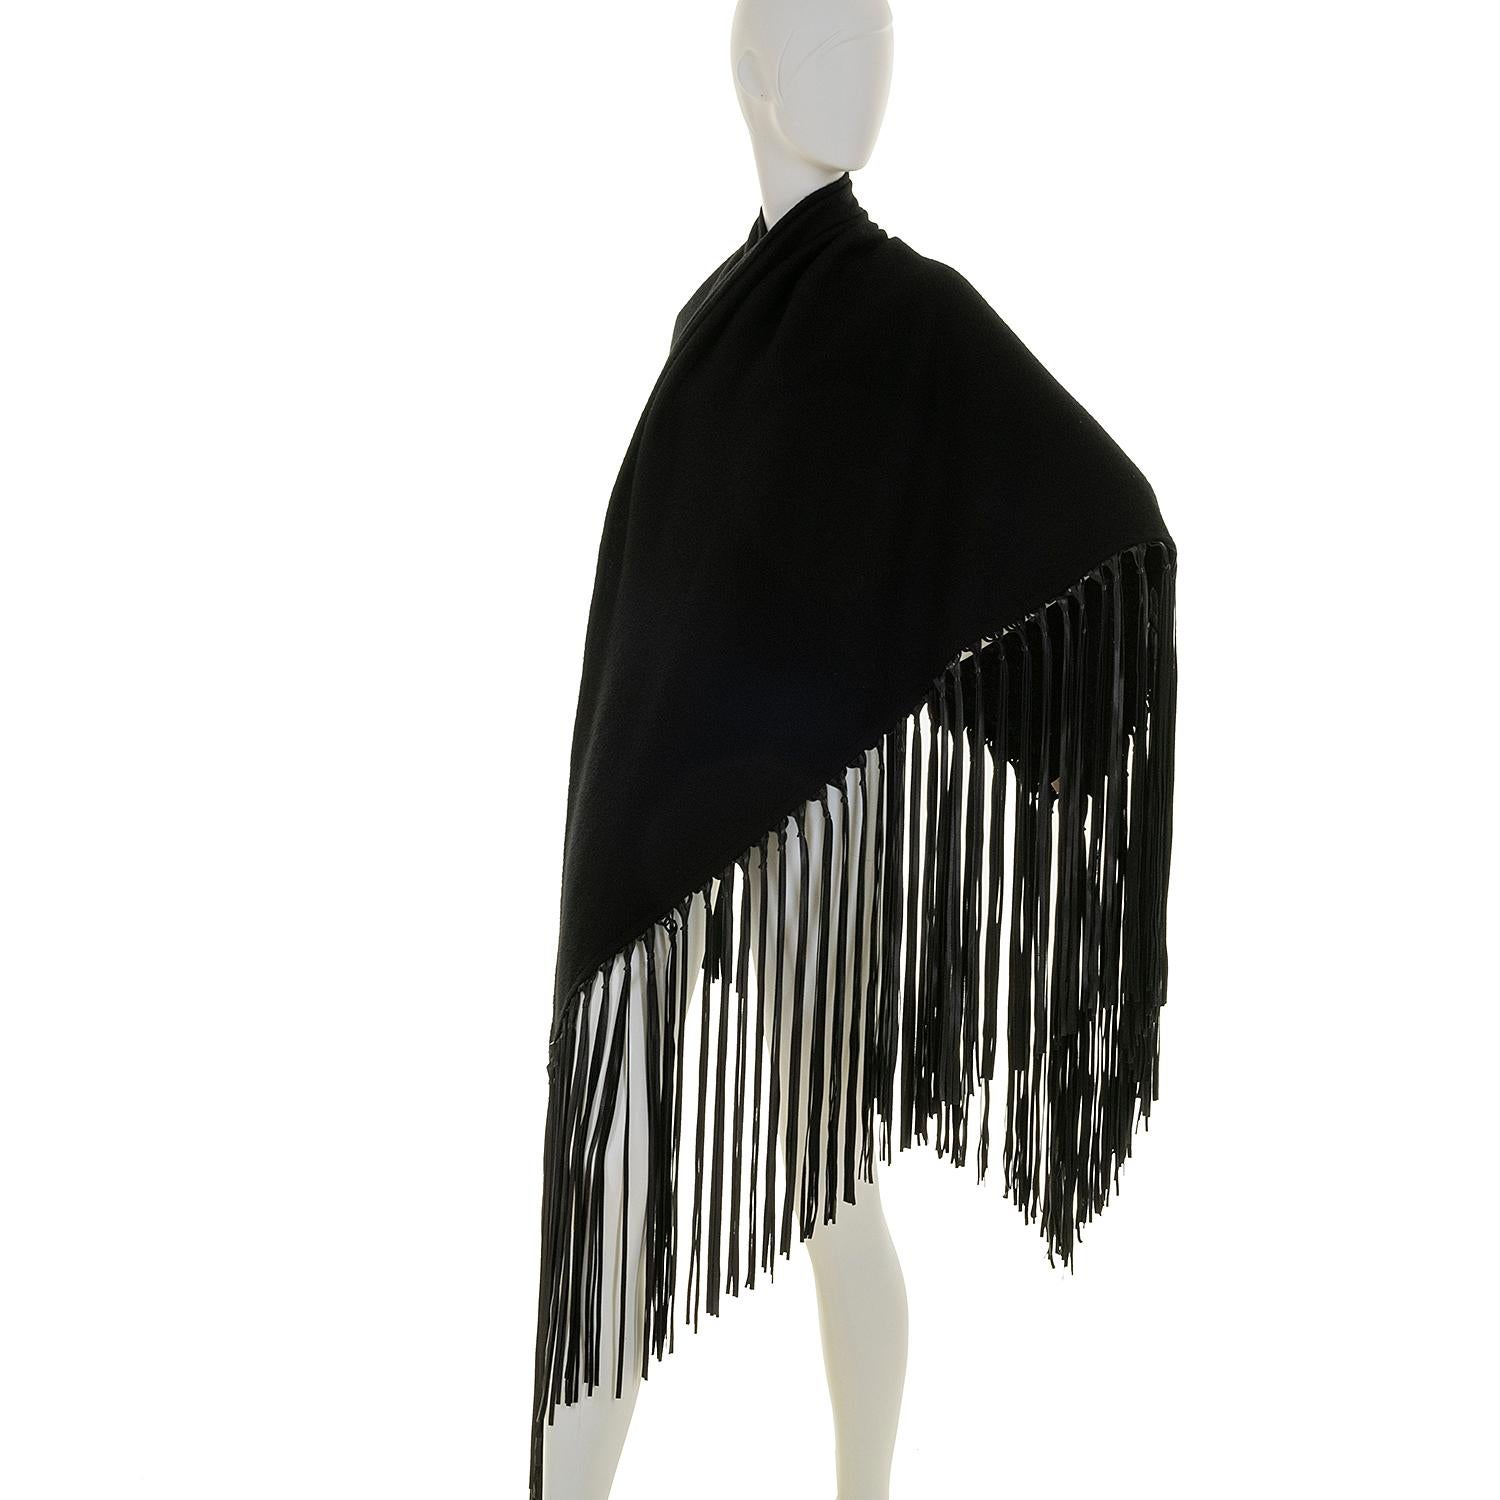 This elegant Hermes Shawl is perfect for the Fall and Winter seasons. In perfect condition, the shawl is 70% cashmere and 30% wool, giving you the warmth but with the luxury feel of cashmere. Trimmed with a black leather tassel fringe, this